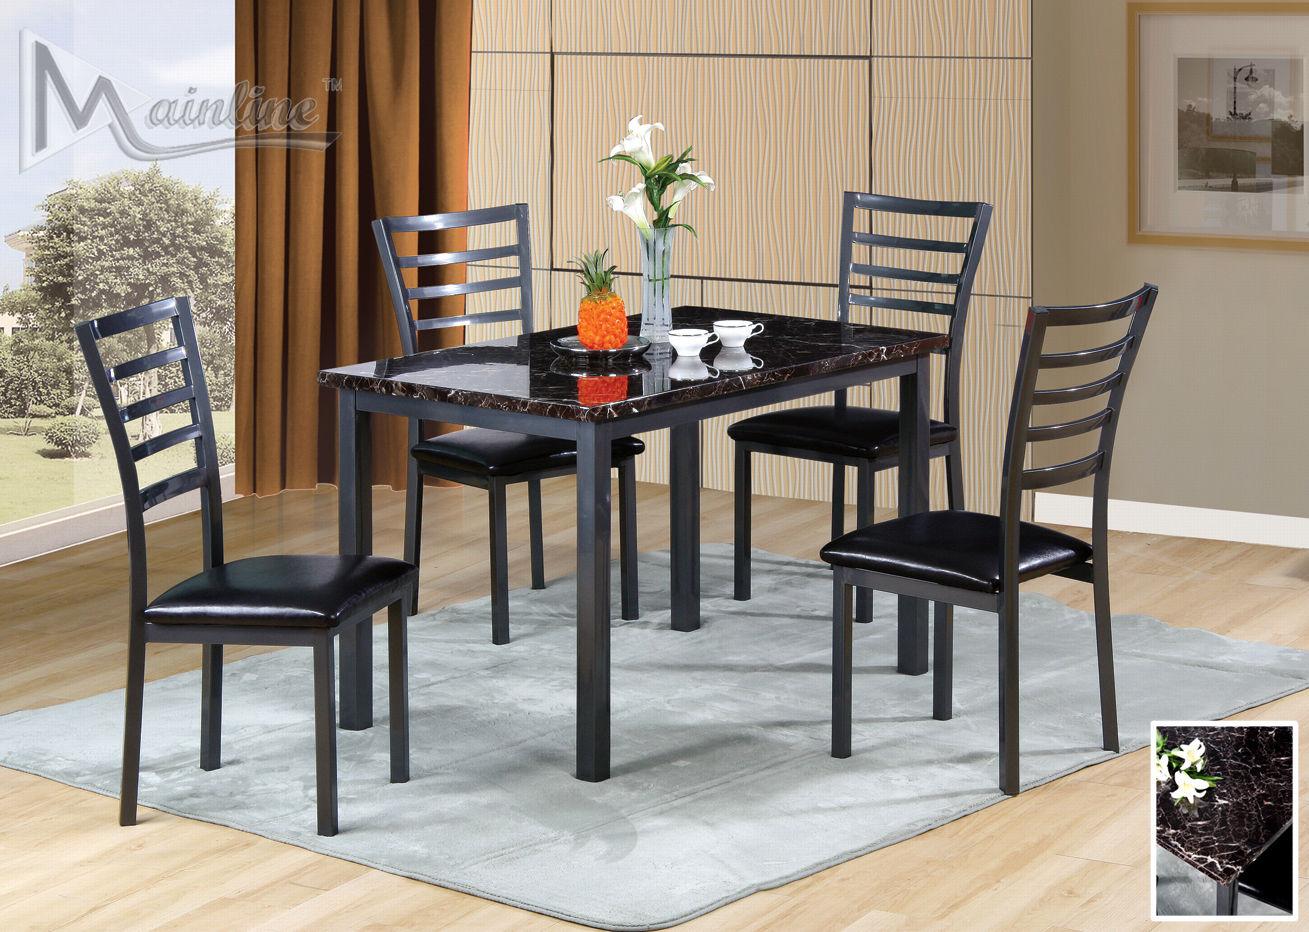 Mainline Dining Set table and four chairs,Store Brand